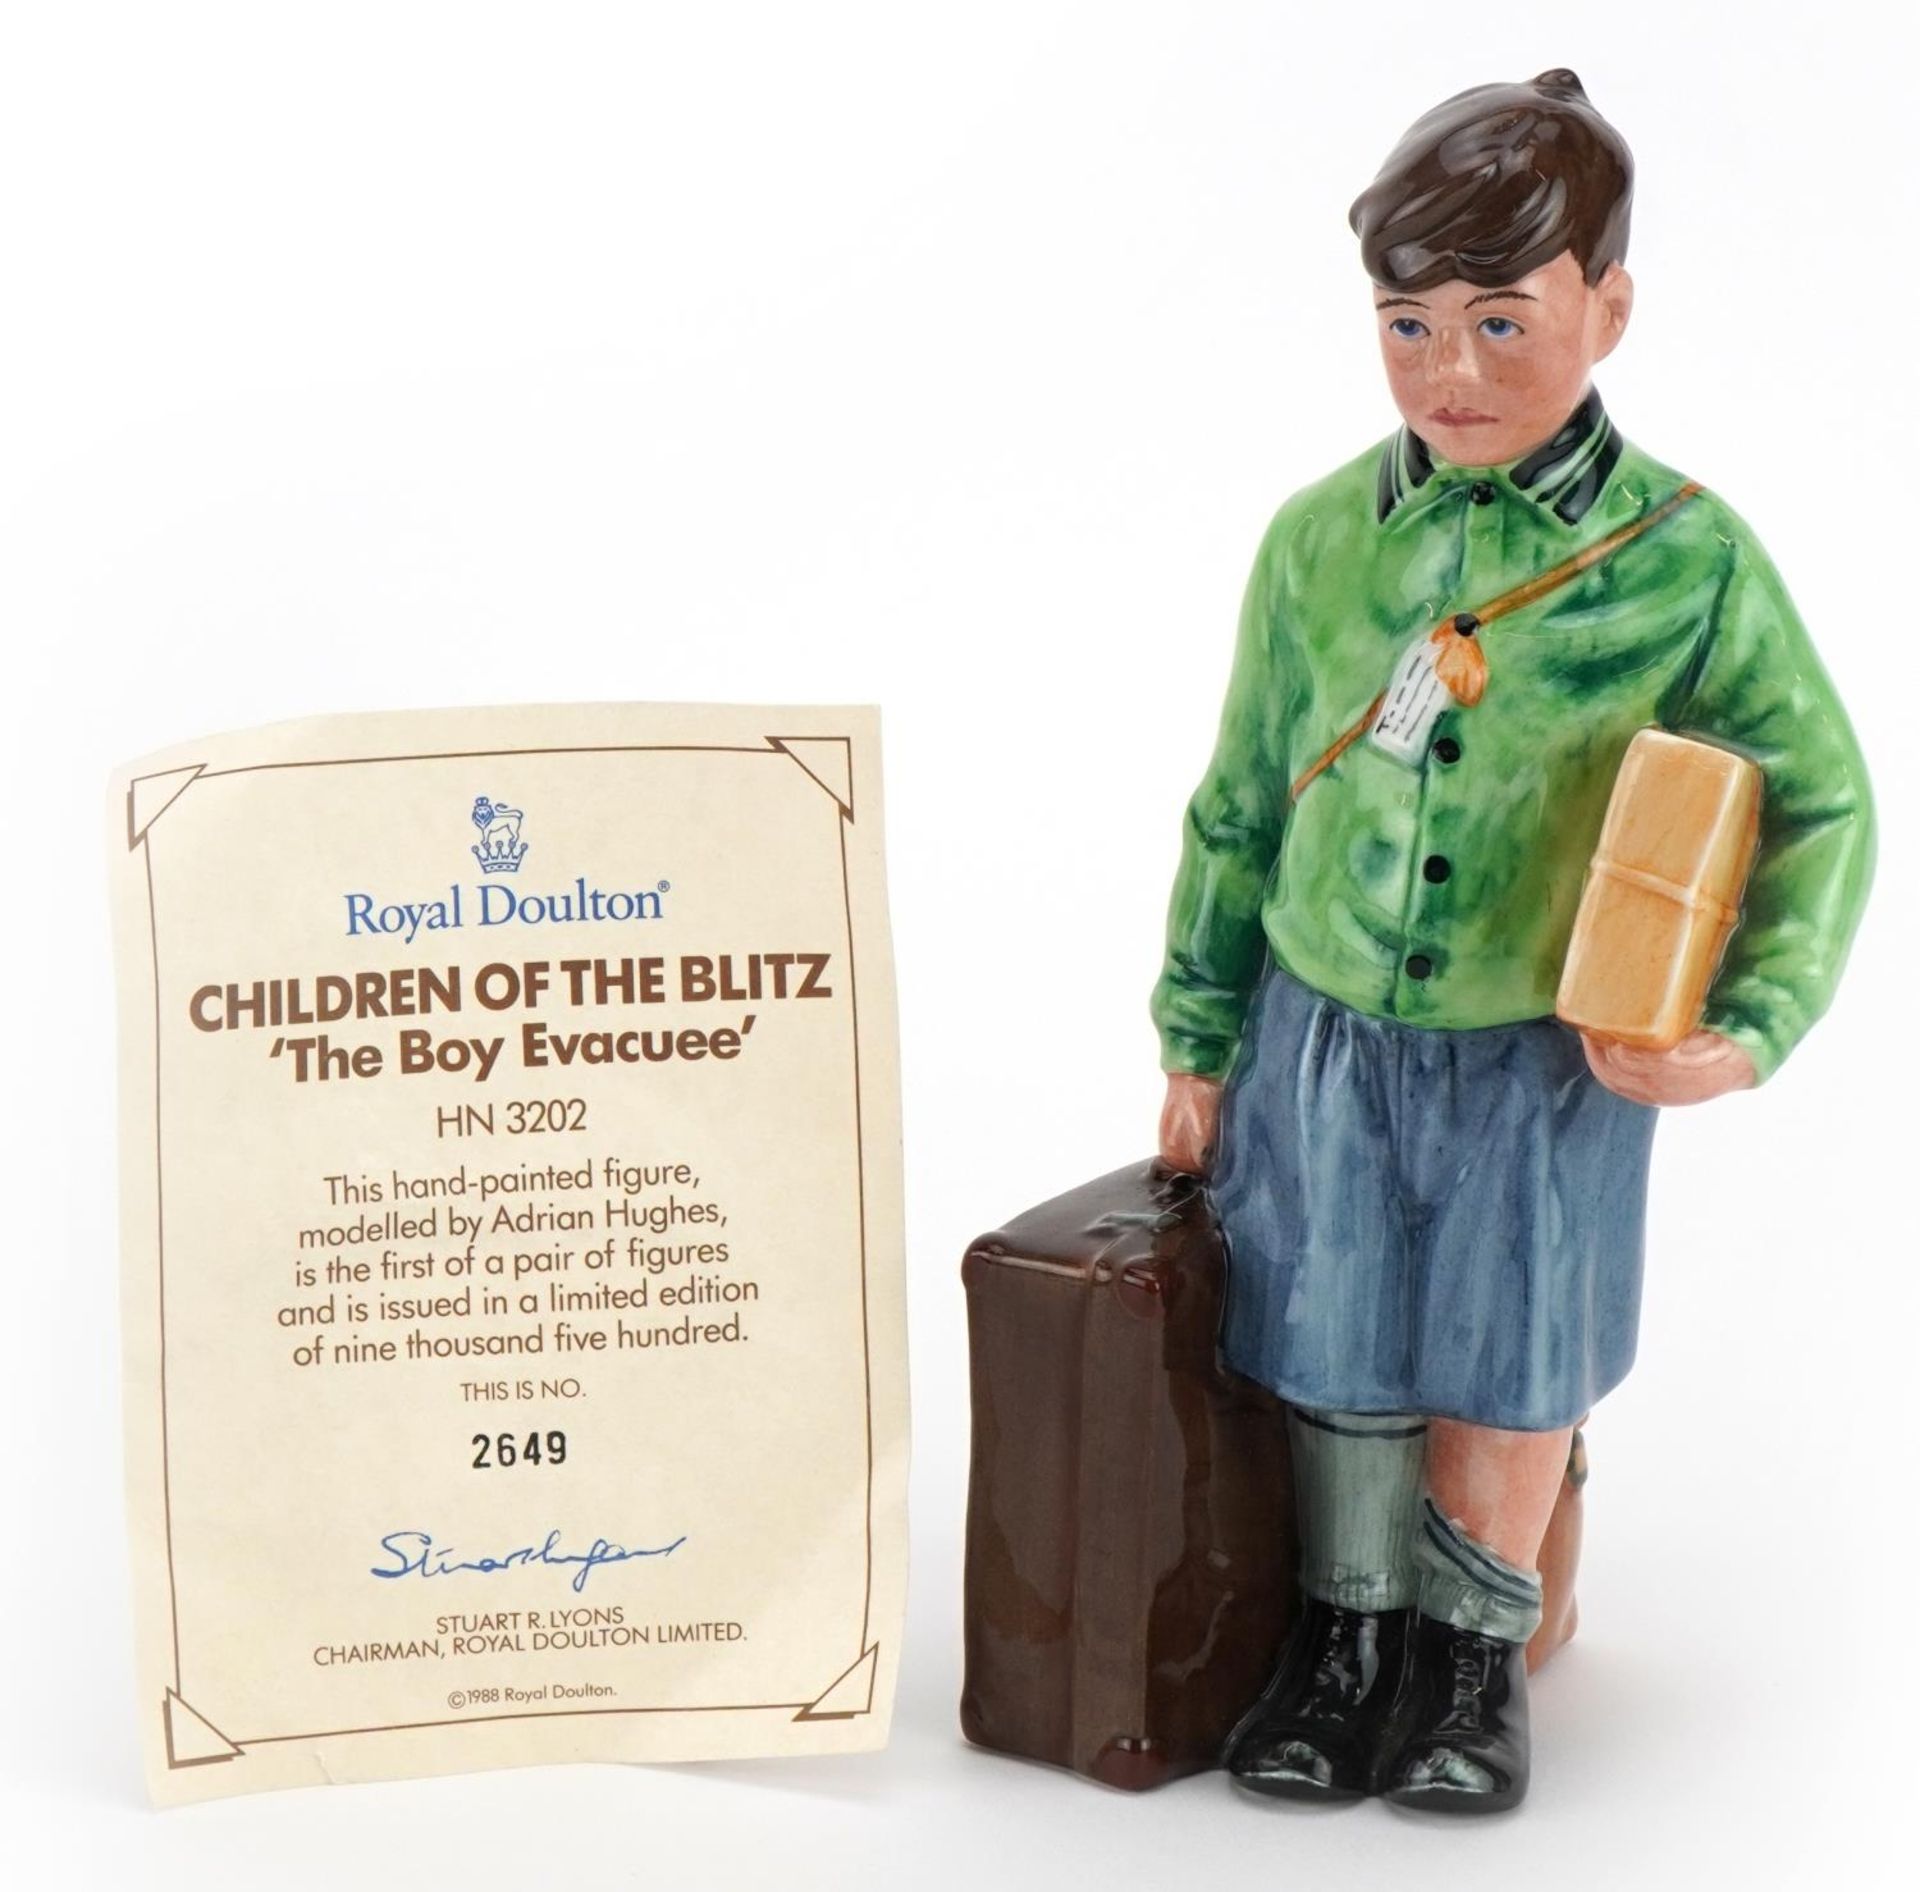 Royal Doulton Children of the Blitz figure with certificate, The Boy Evacuee HN3202, limited edition - Image 2 of 4